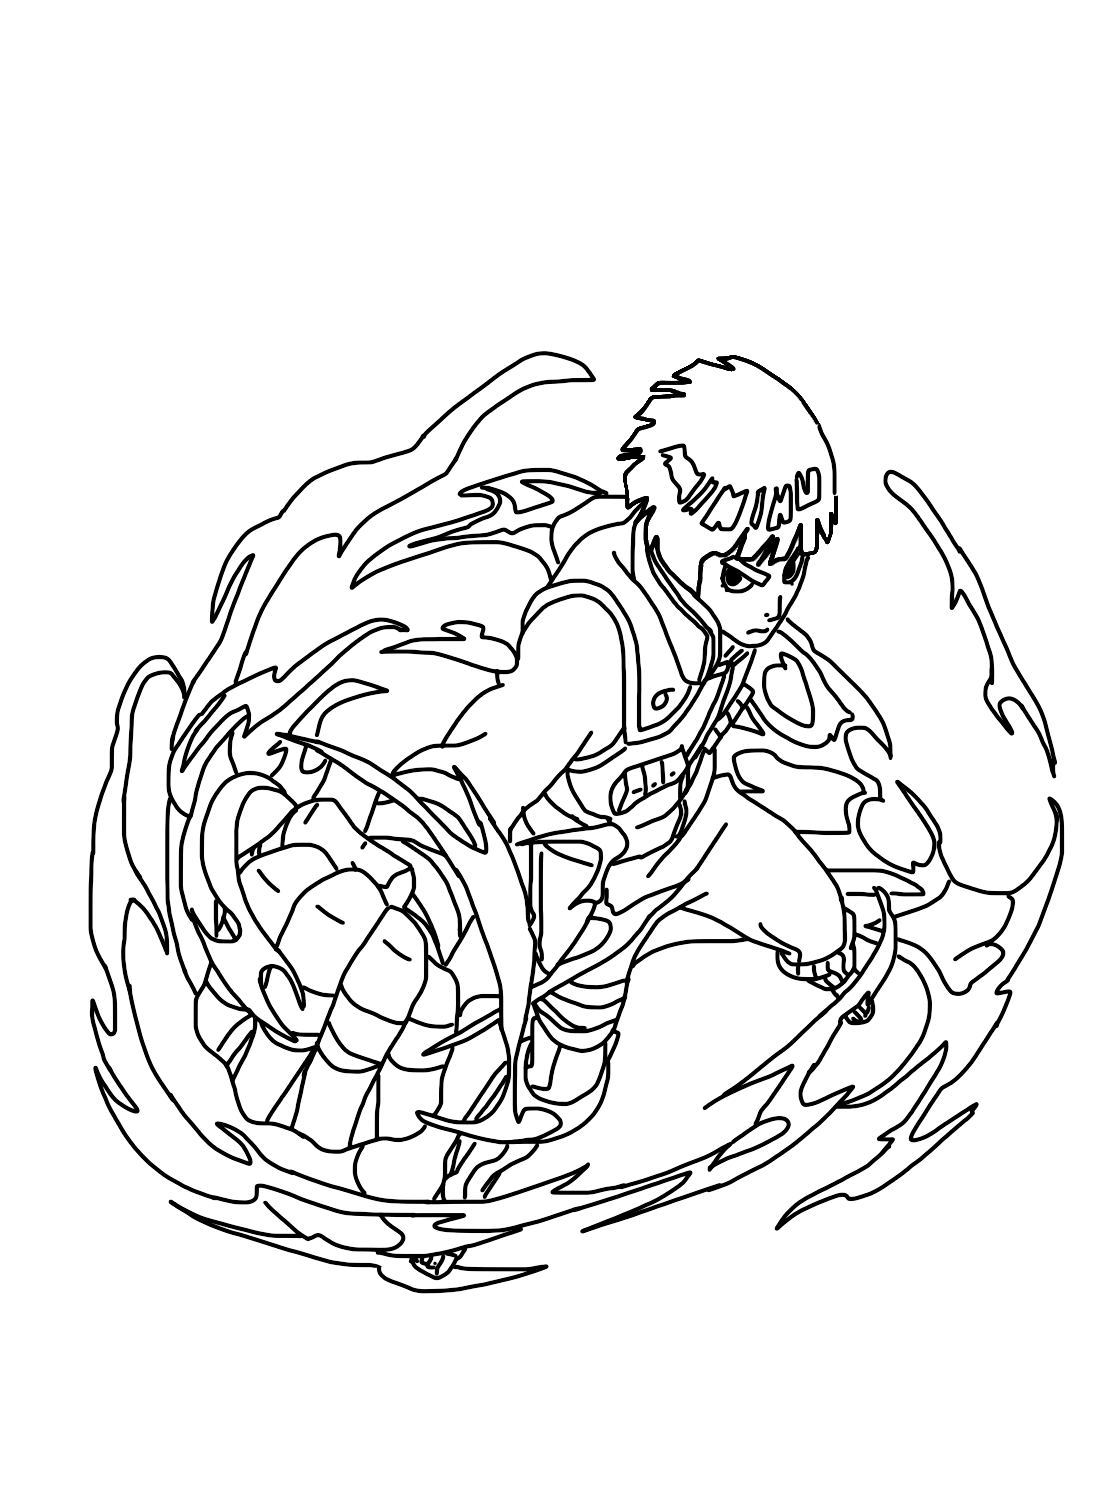 Rock Lee Coloring Page - Free Printable Coloring Pages